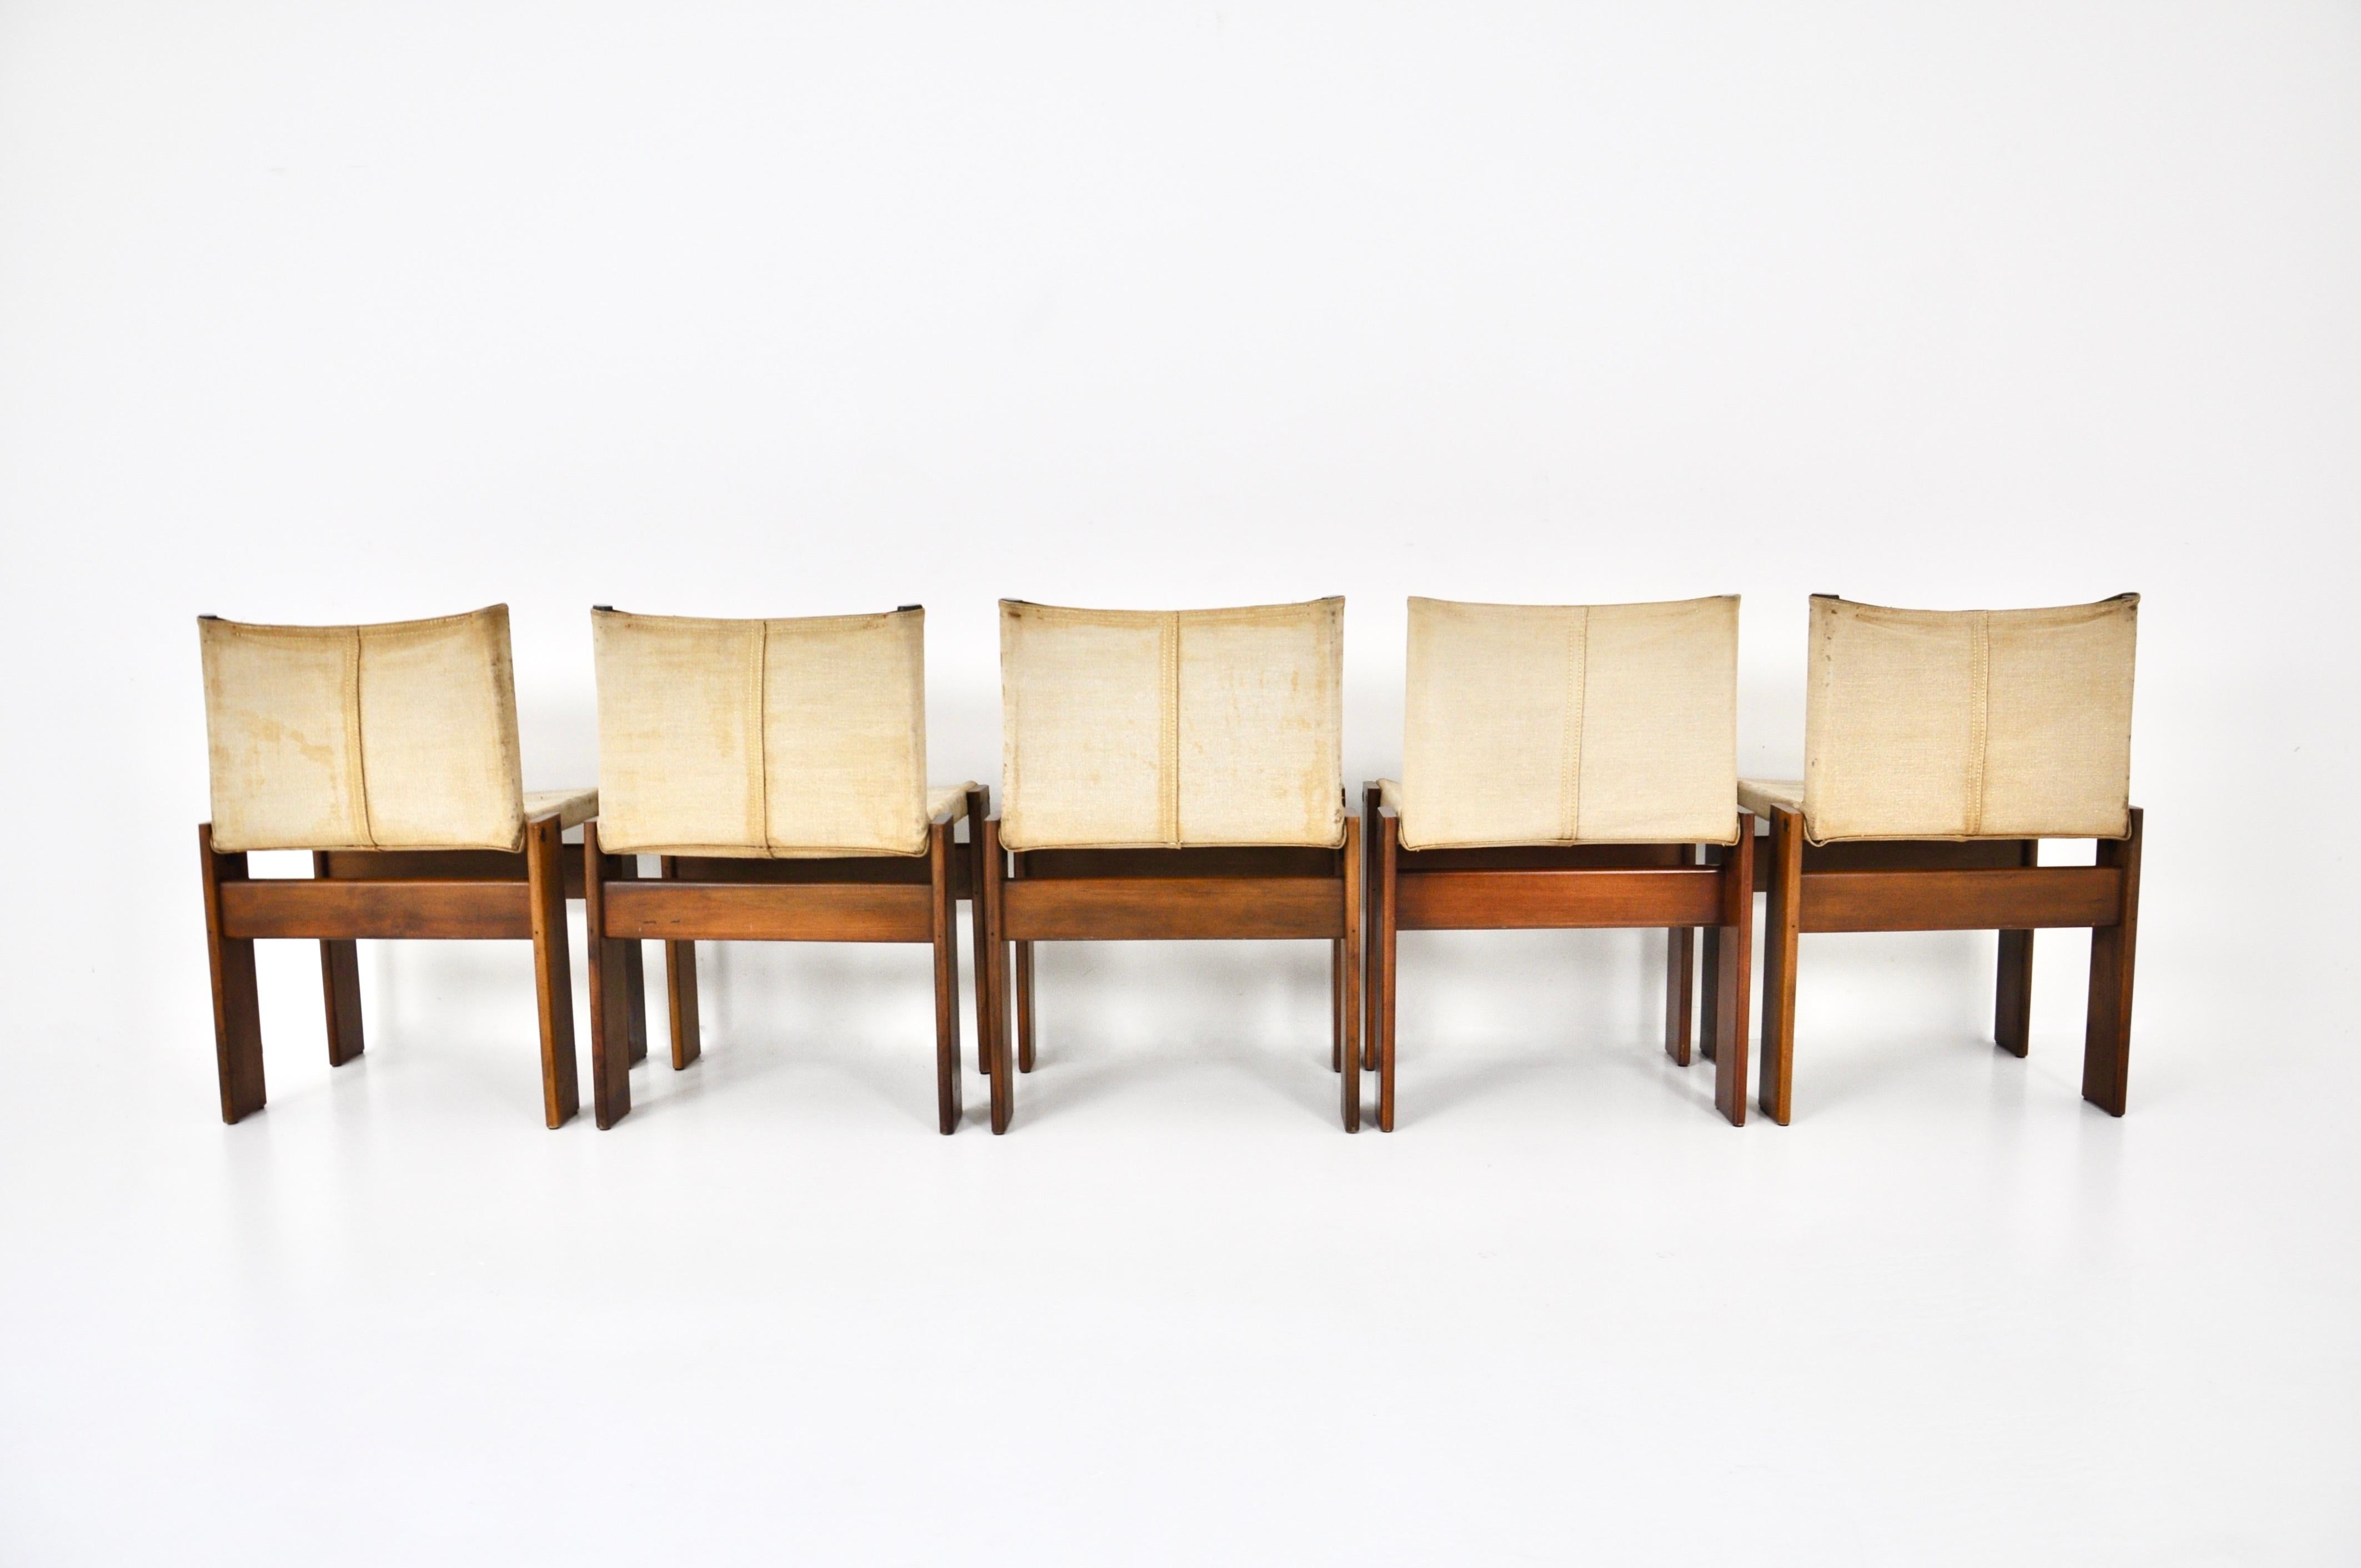 Italian Monk Dining Chairs by Afra & Tobia Scarpa for Molteni, 1970s, set of 5 For Sale